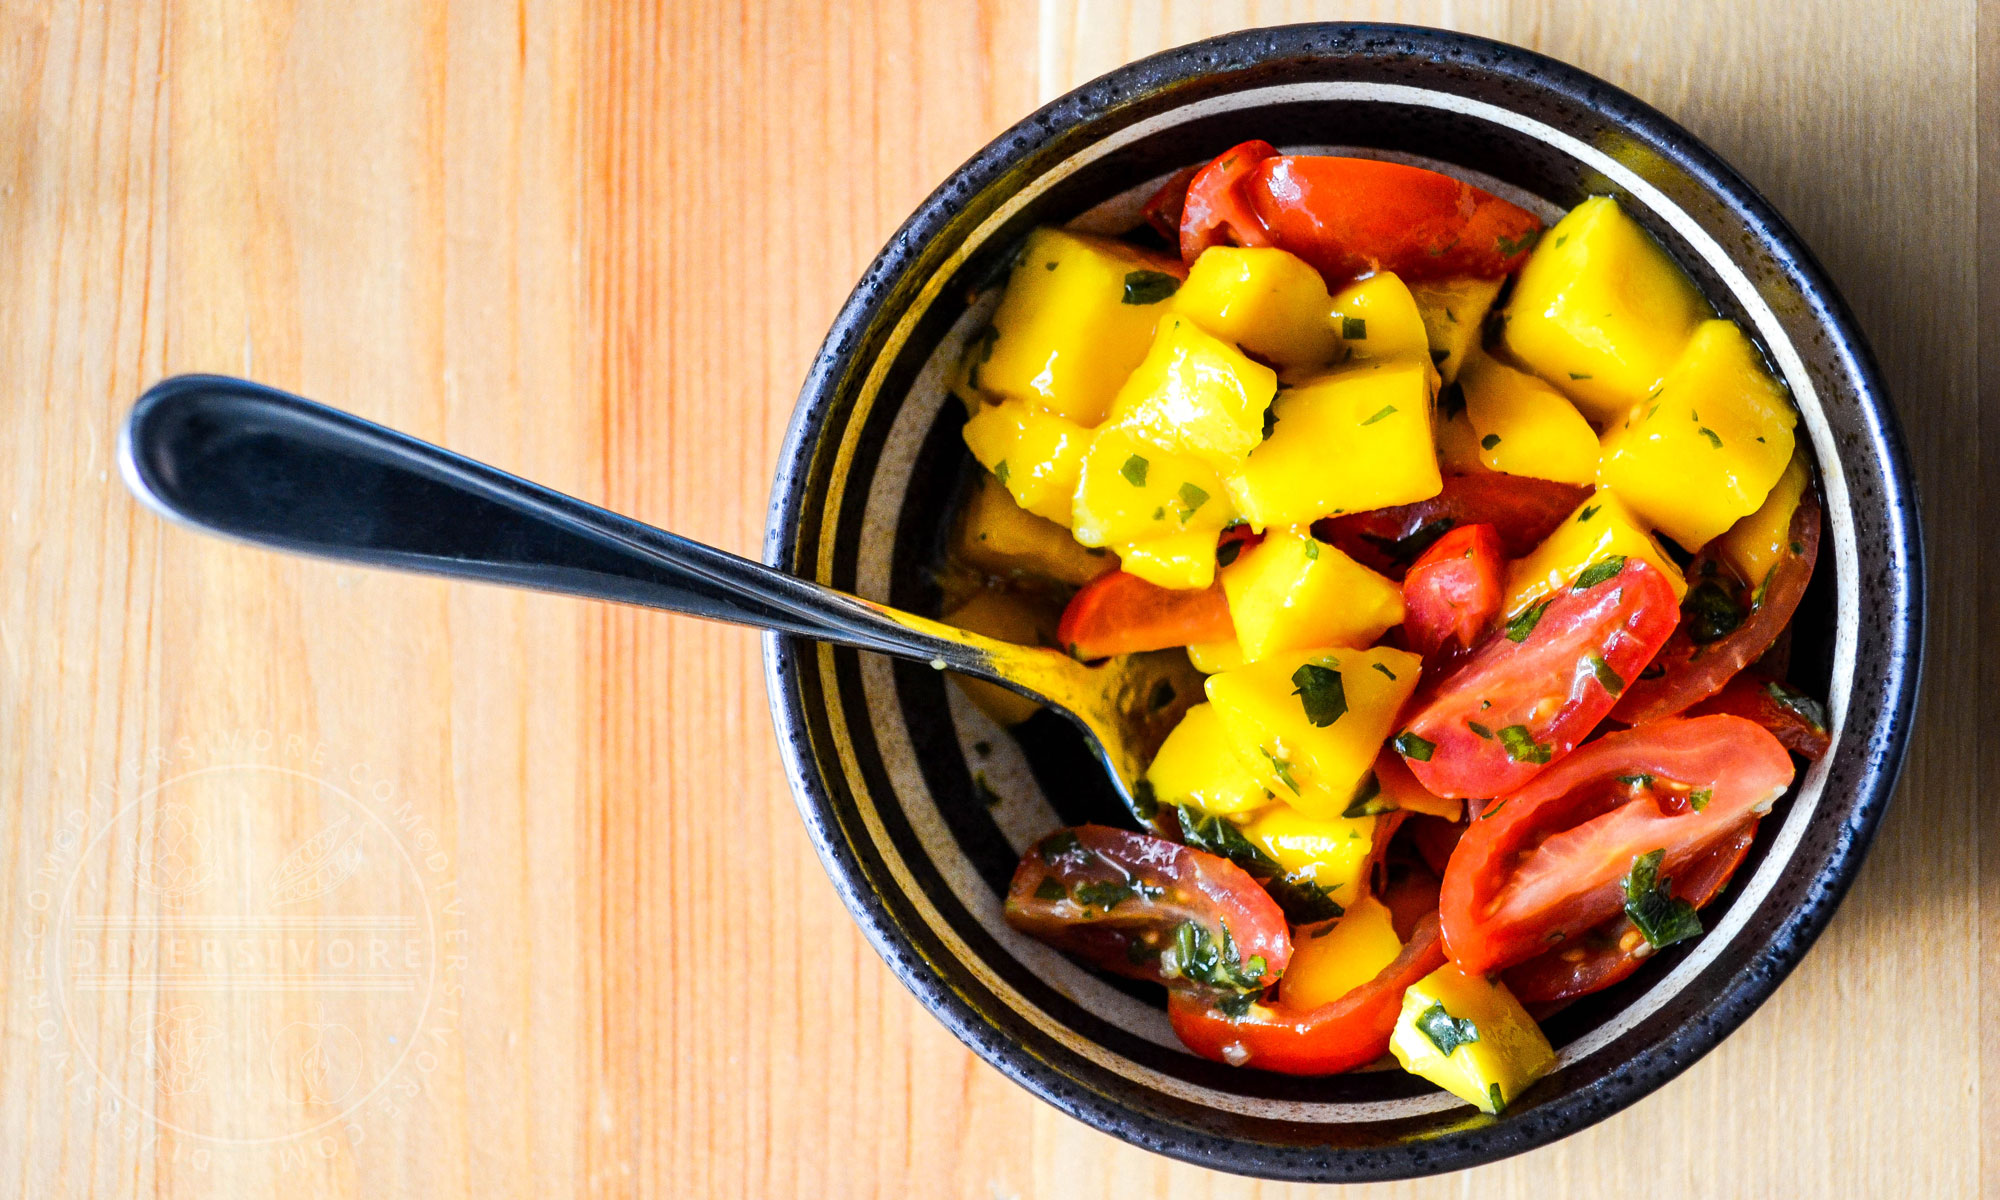 Featured image for “Mango & Tomato Salad with Mint Chimichurri”